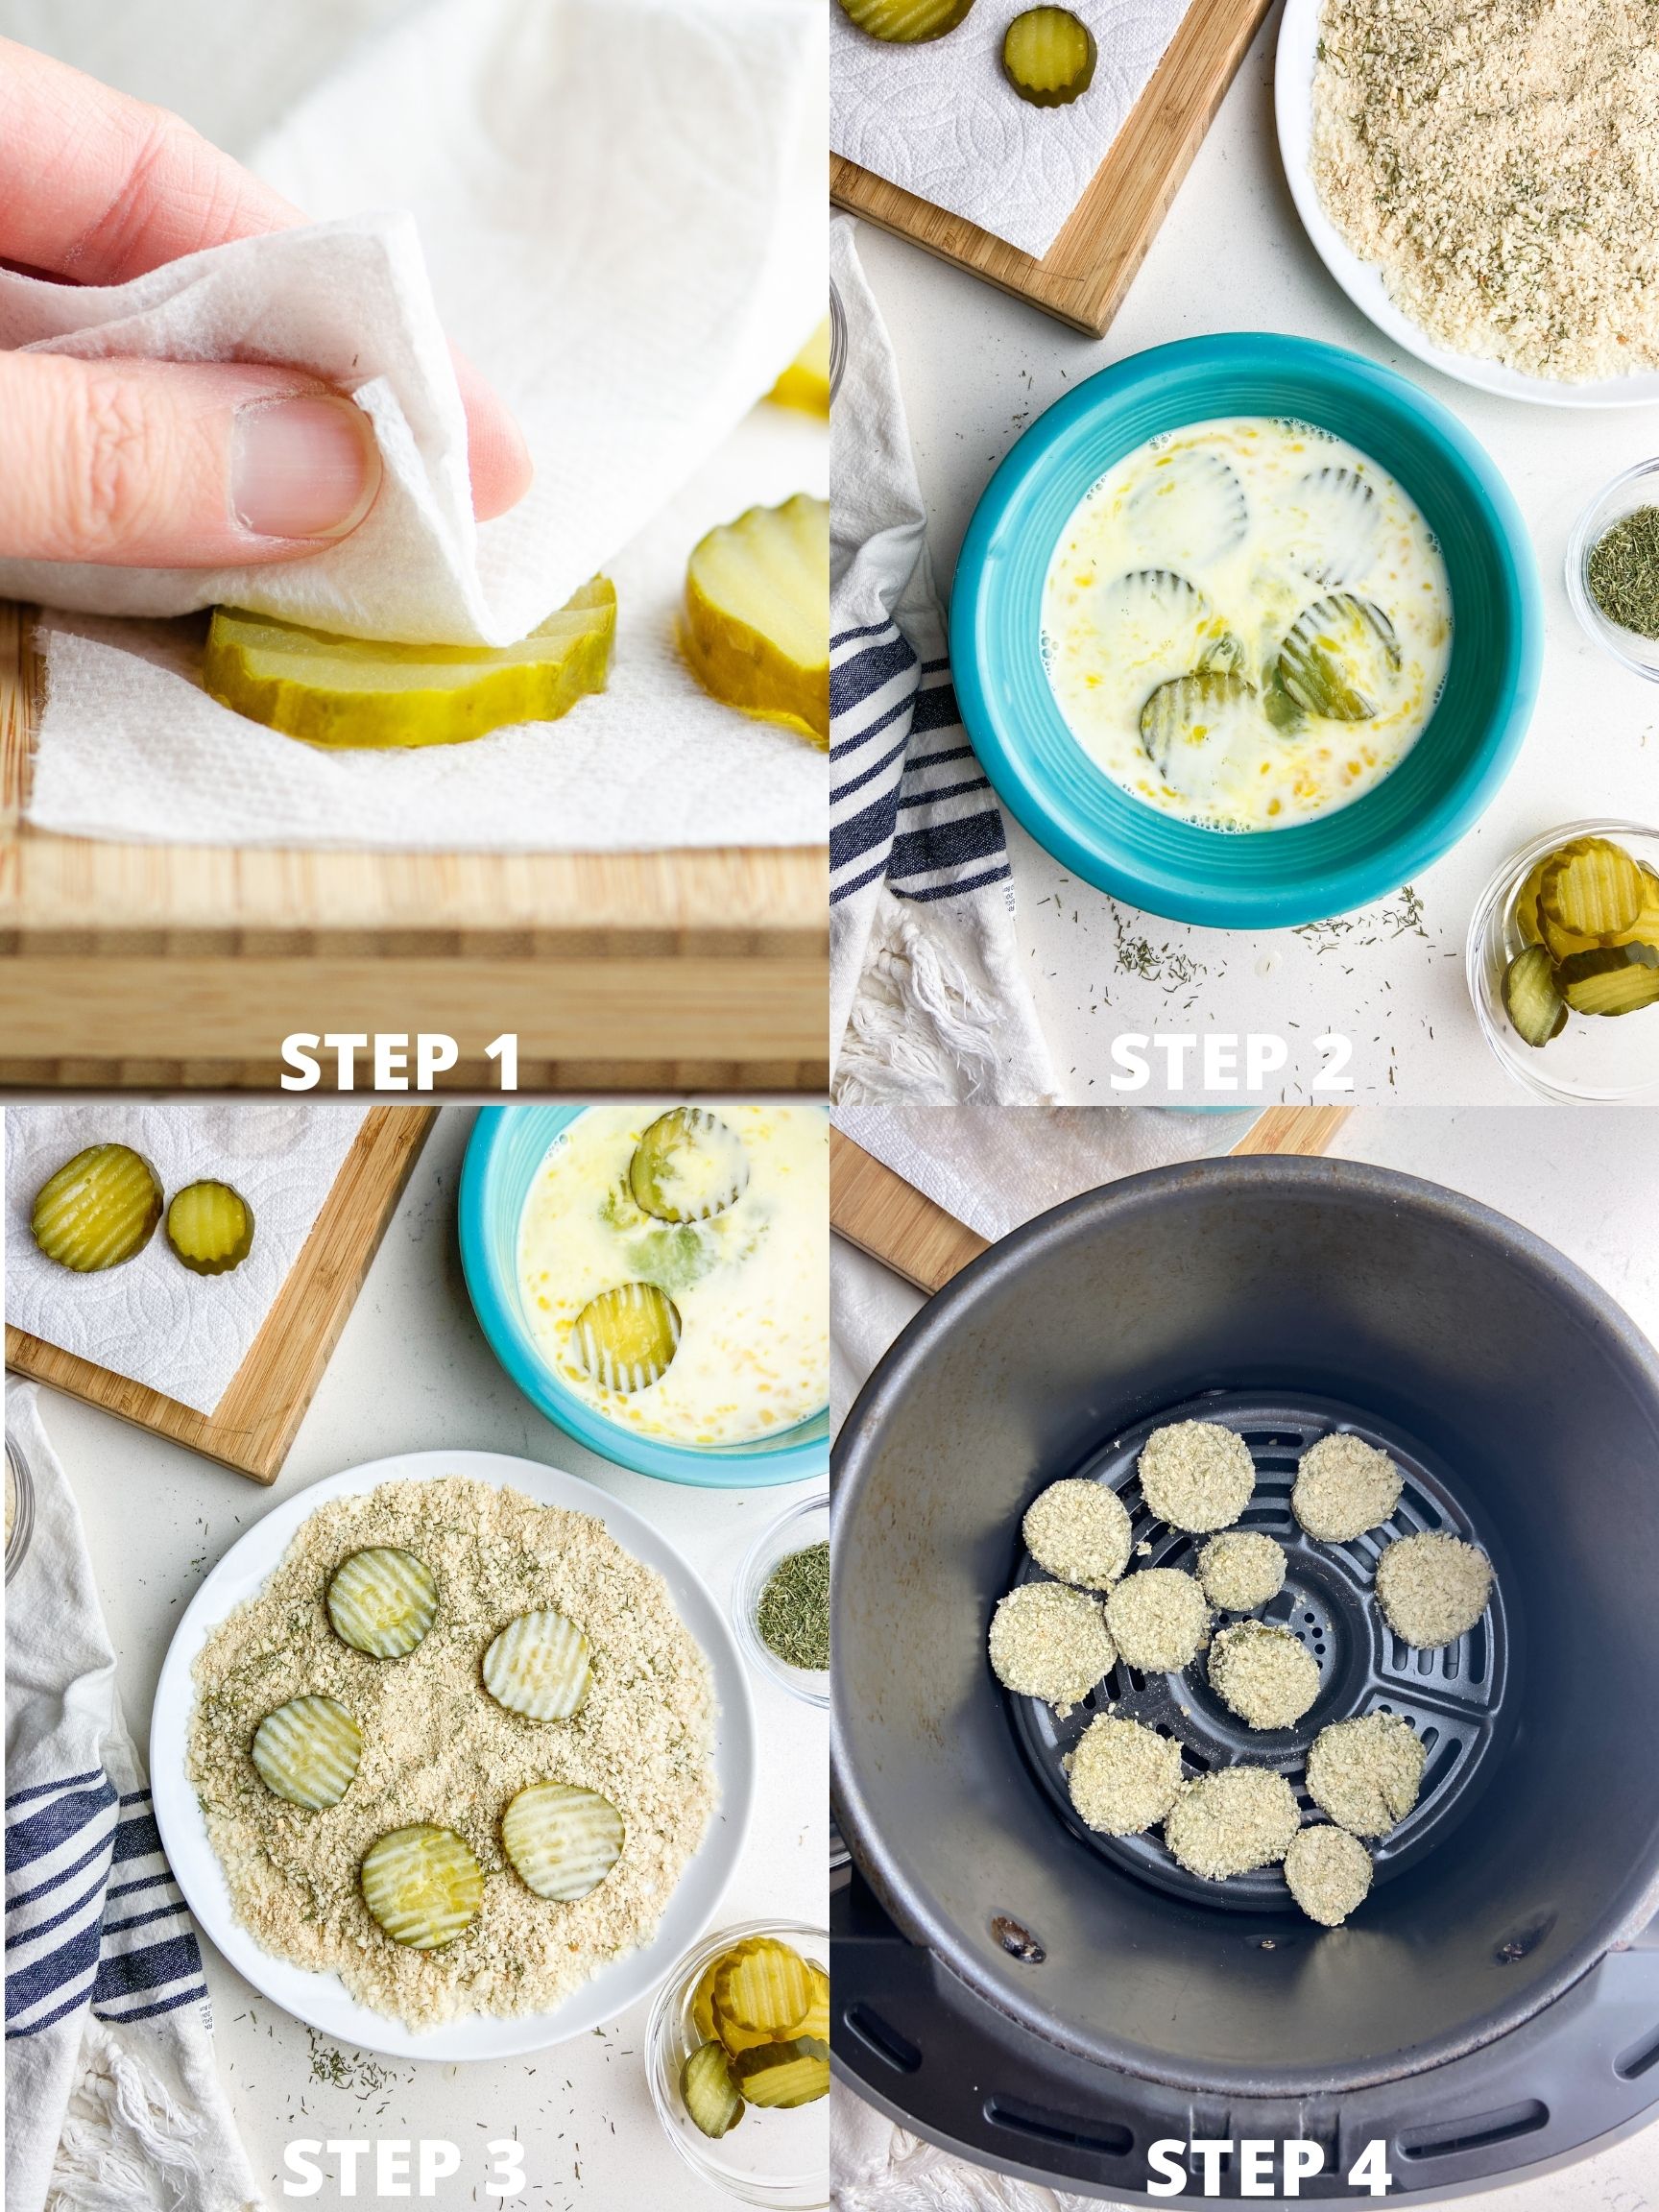 Step by step instructions for how to make air fryer fried pickles